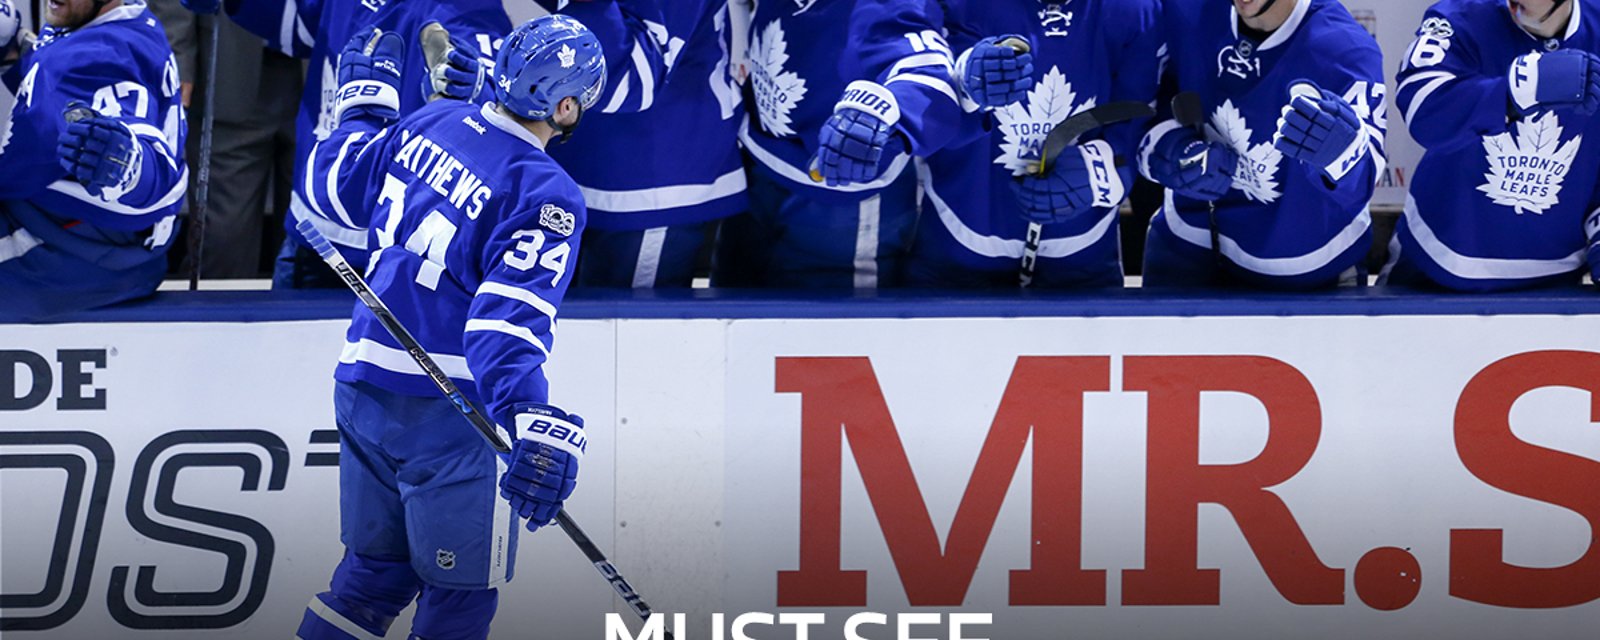 Muse see: Leafs score two quick goals against the Pens!